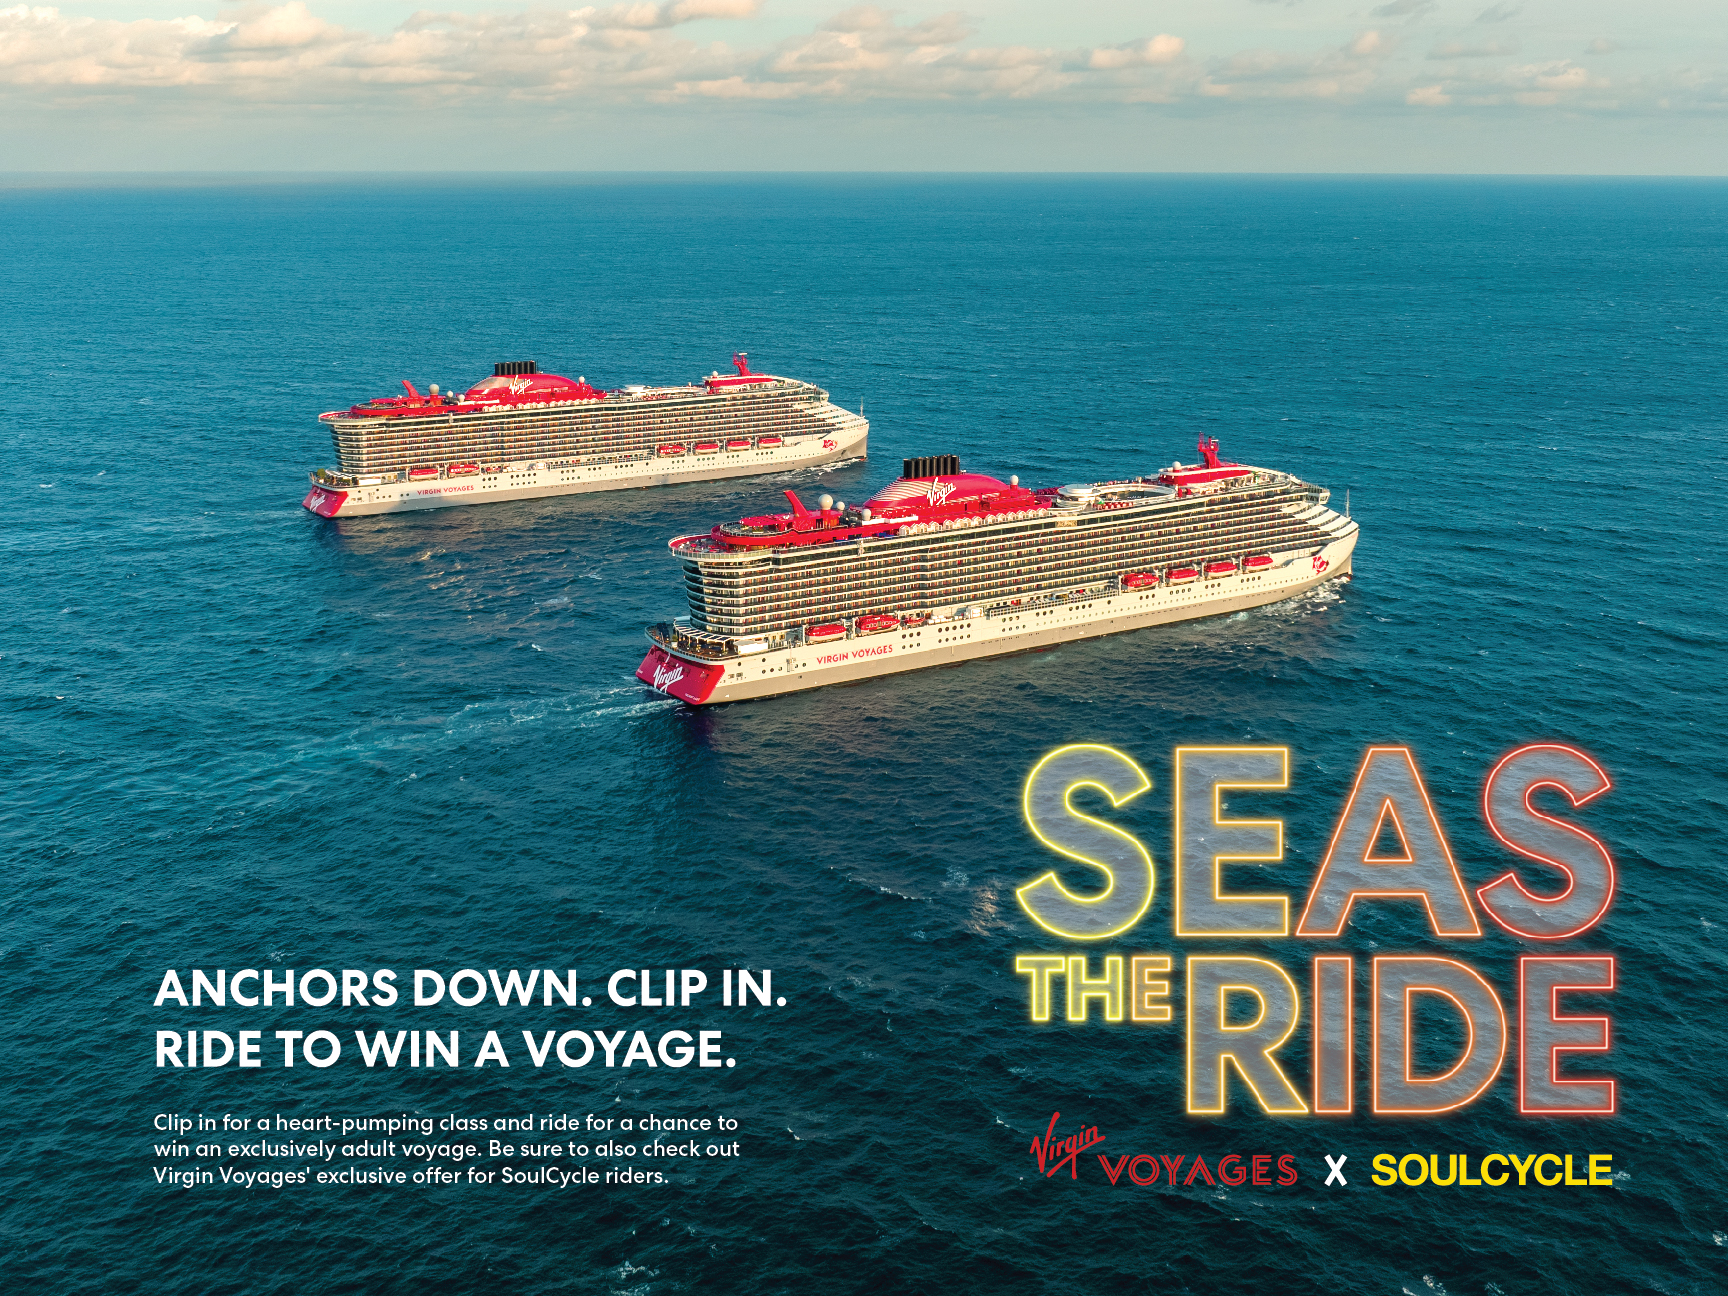 Virgin Voyages and SoulCycle